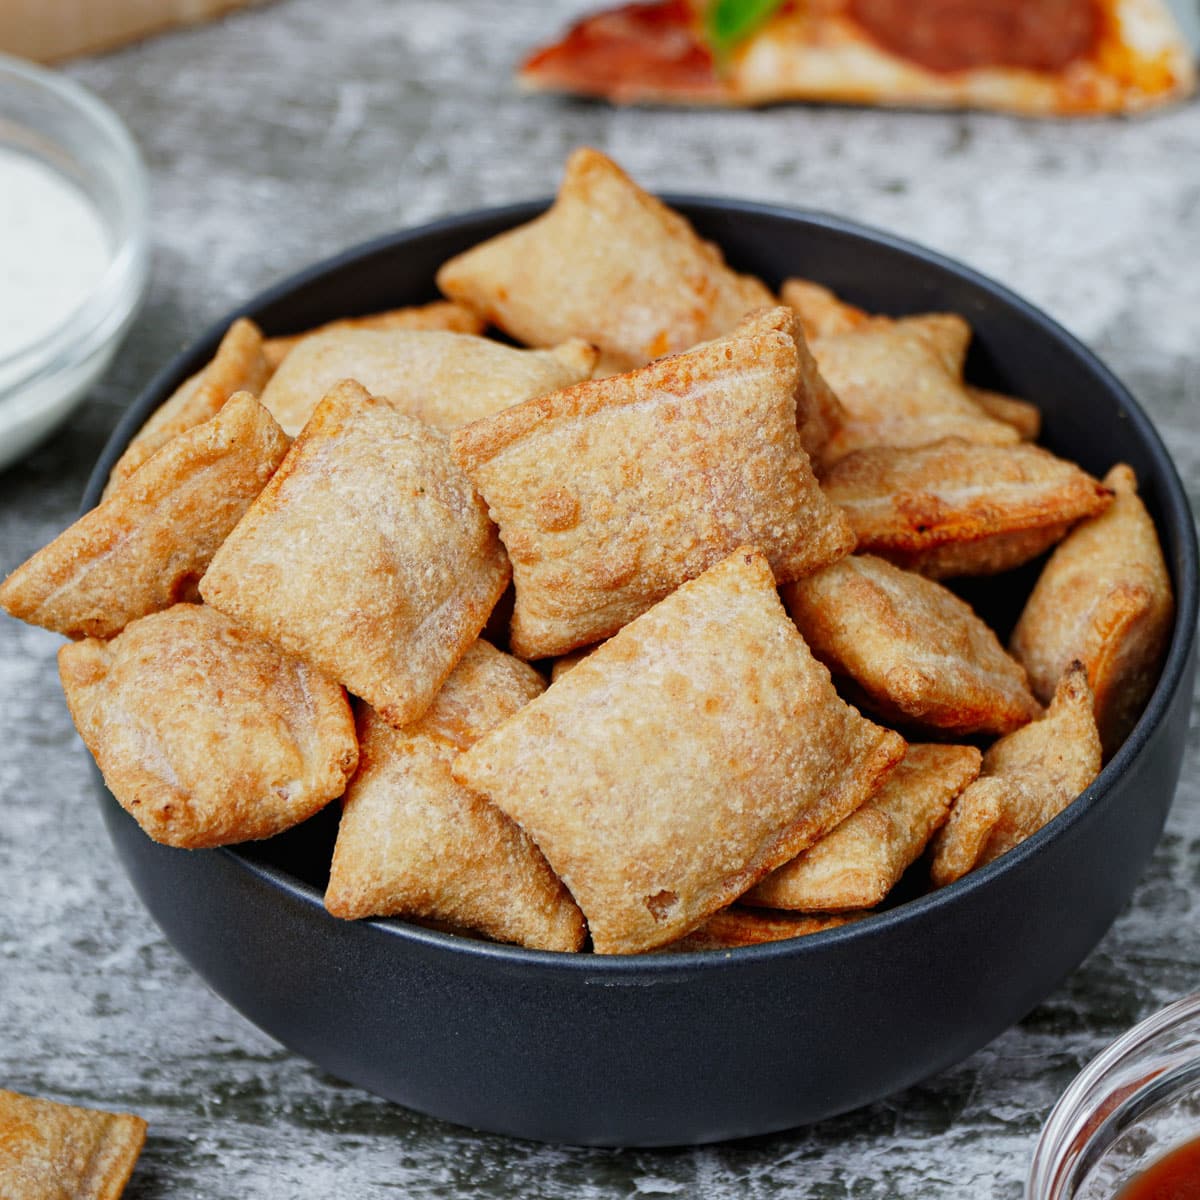 Air fried frozen pizza bites in a black bowl.